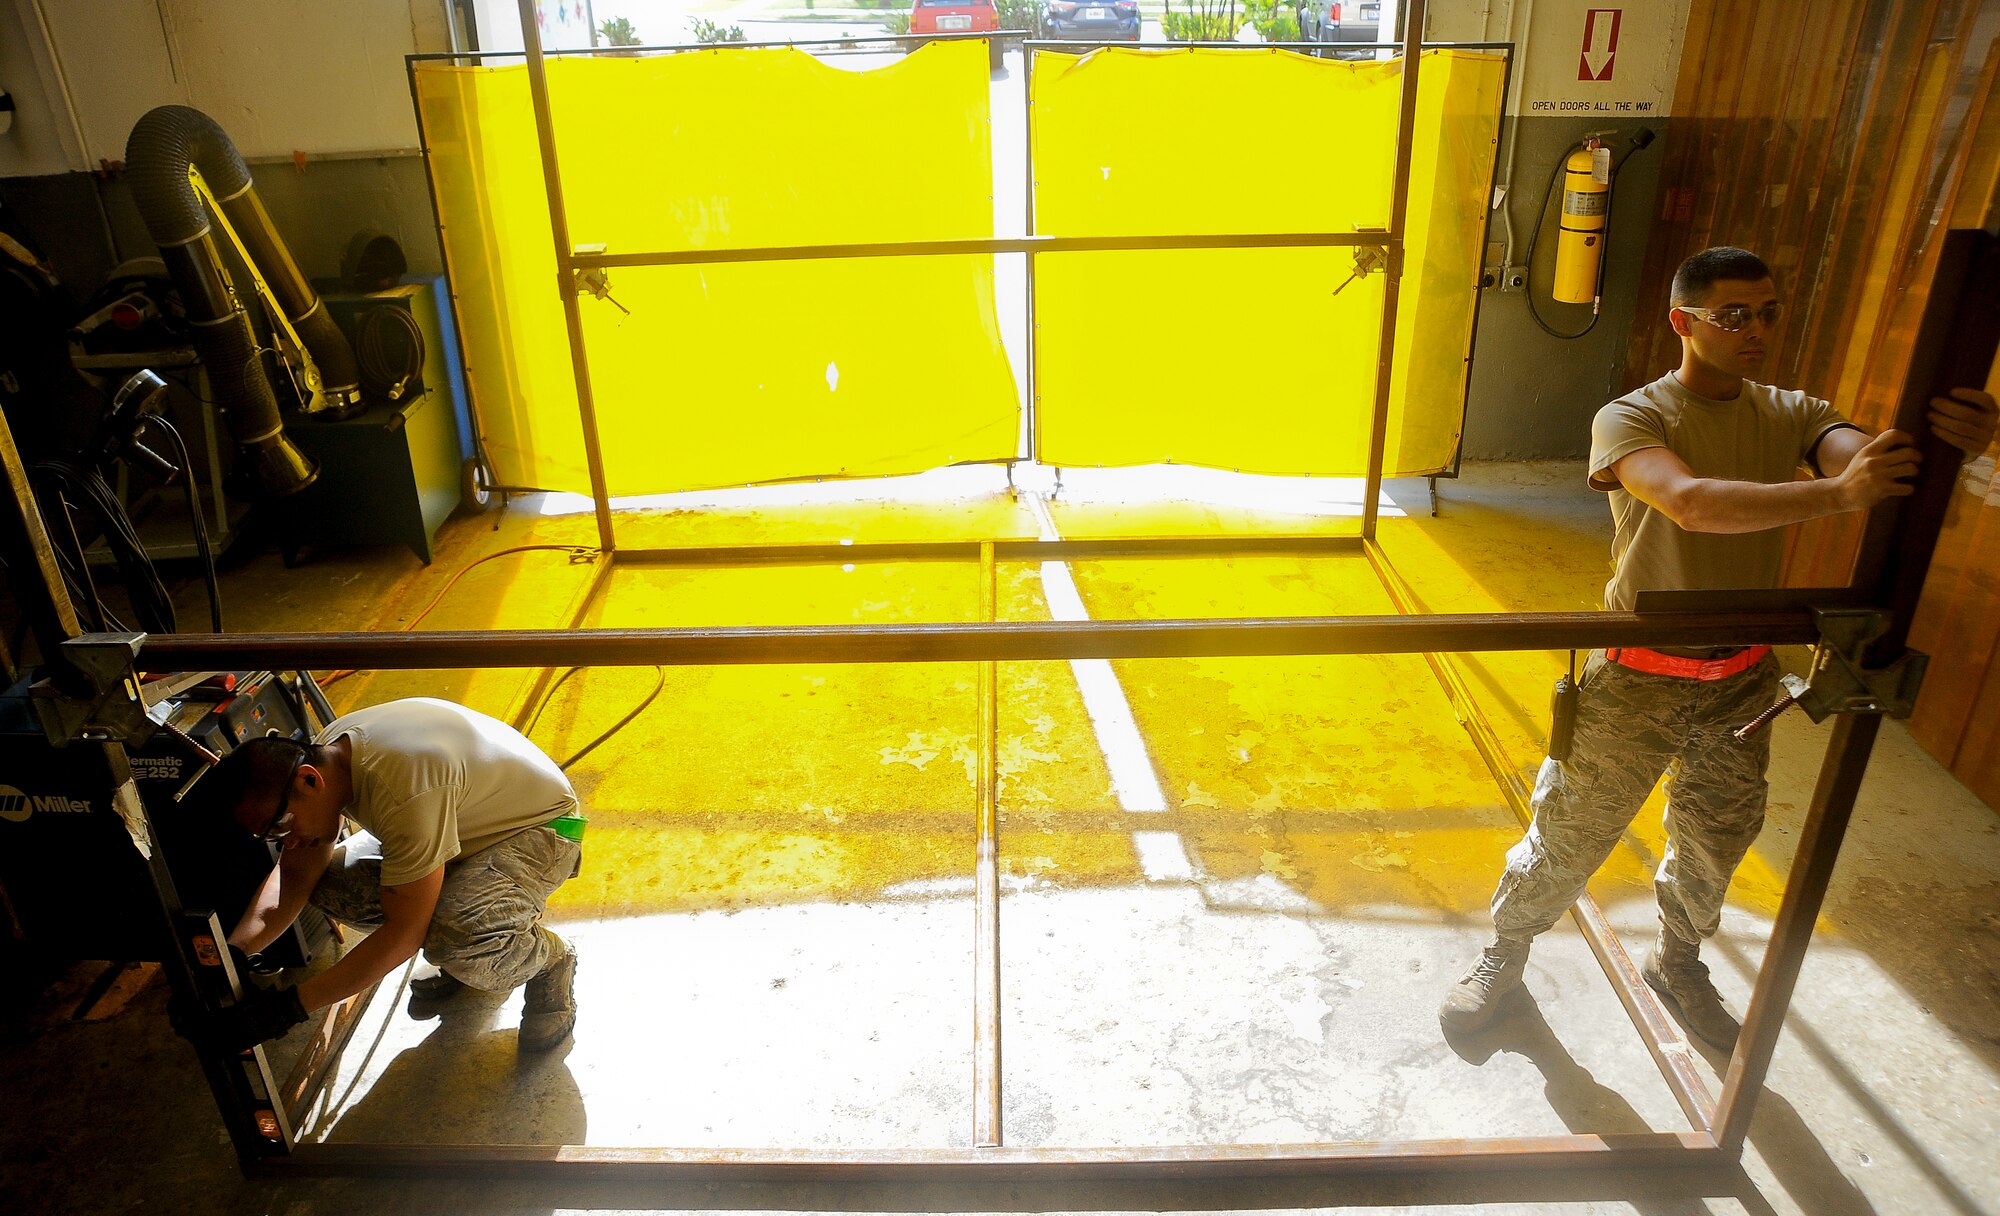 Staff Sgt. Armand Guting, left, and Senior Airman Andrew Flanagan, right, aircraft metals technology technicians with the 6th Maintenance Squadron, measure a side of the paint rack at MacDill Air Force Base, Fla., May 20, 2016. Once the rack is complete, the rack will be placed into the corrosion control facility paint booth where it will hold parts that can be painted from a 360-degree angle. (U.S. Air Force photo by Airman 1st Class Mariette Adams)